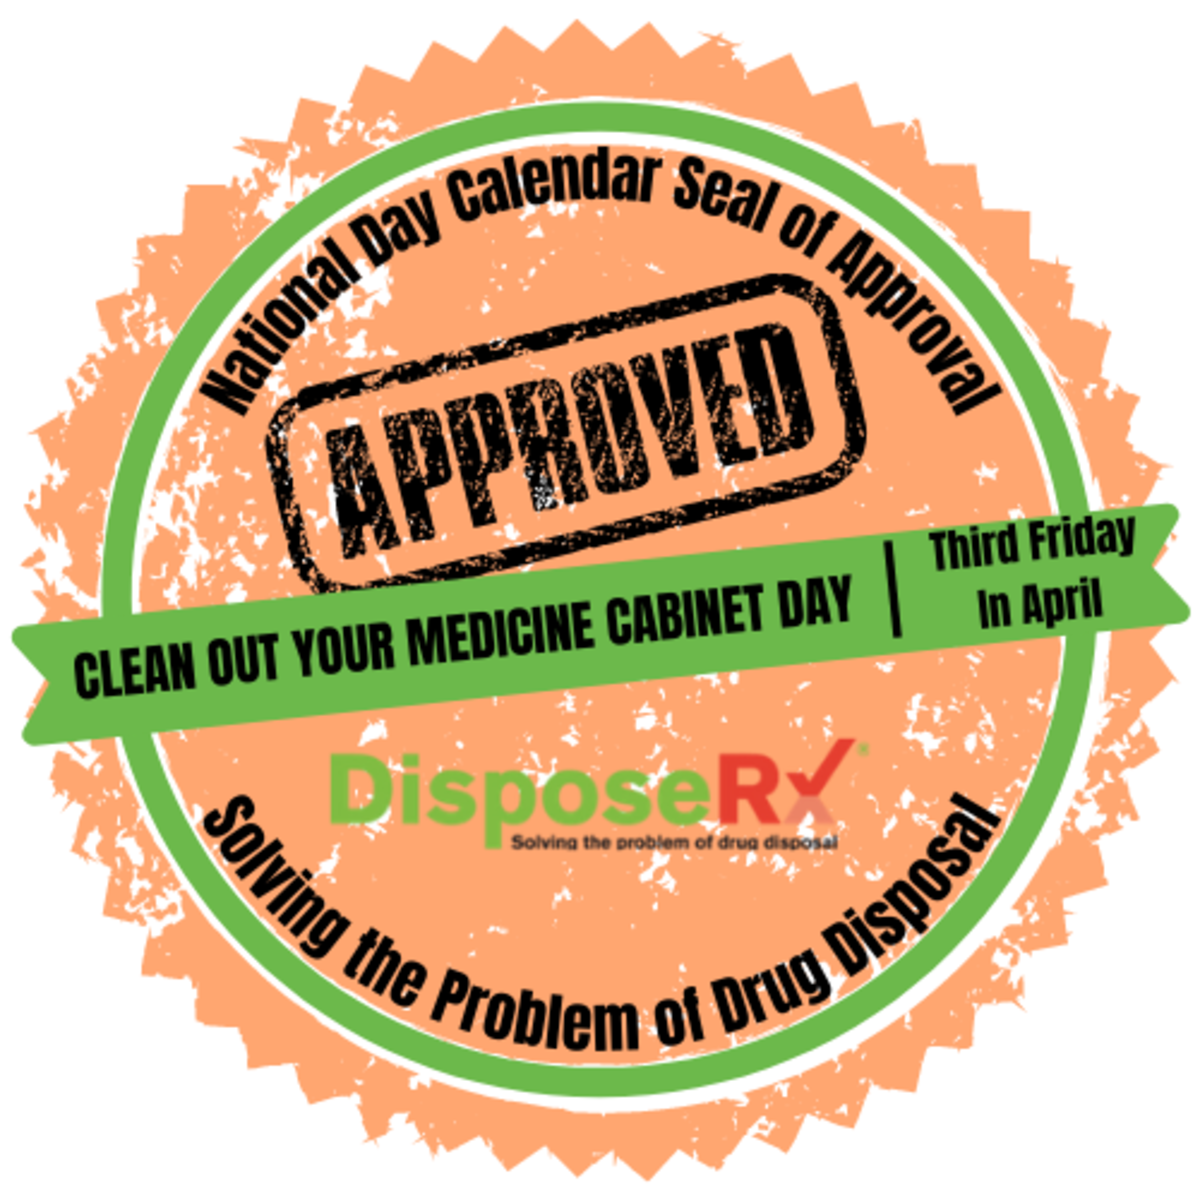 Dispose RX, National Clean Out Your Medicine Cabinet Day, seal